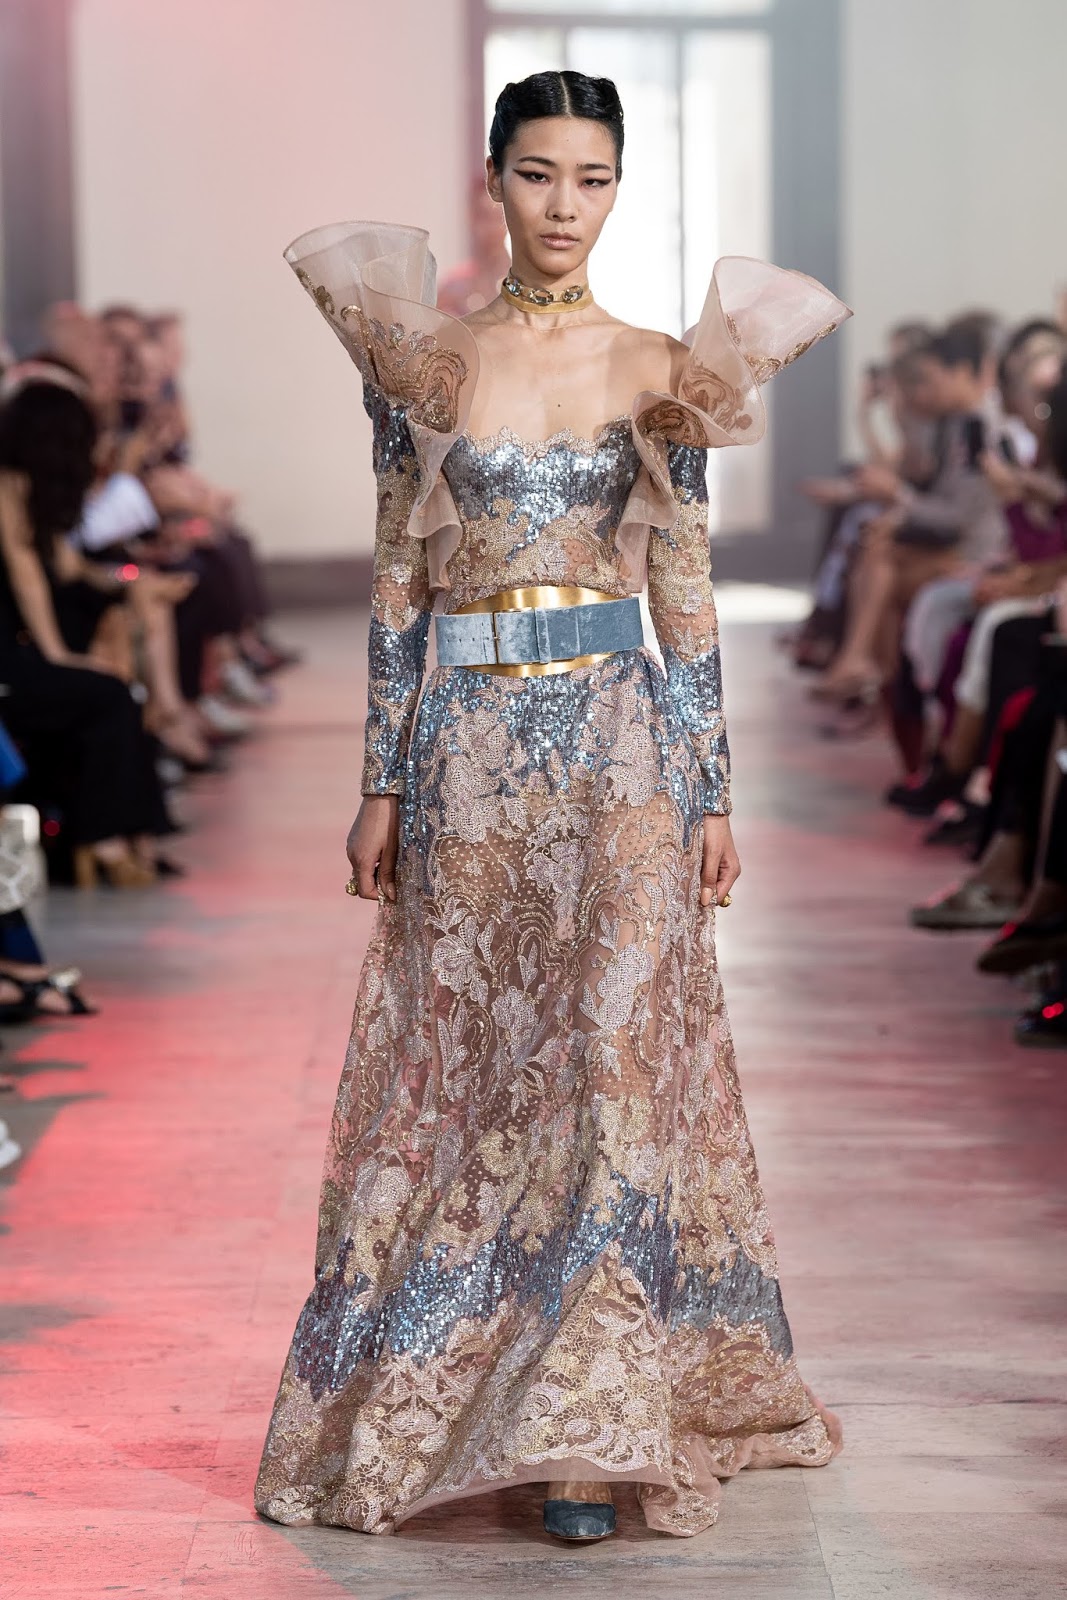 HAUTE COUTURE: ELIE SAAB July 15, 2019 | ZsaZsa Bellagio - Like No Other